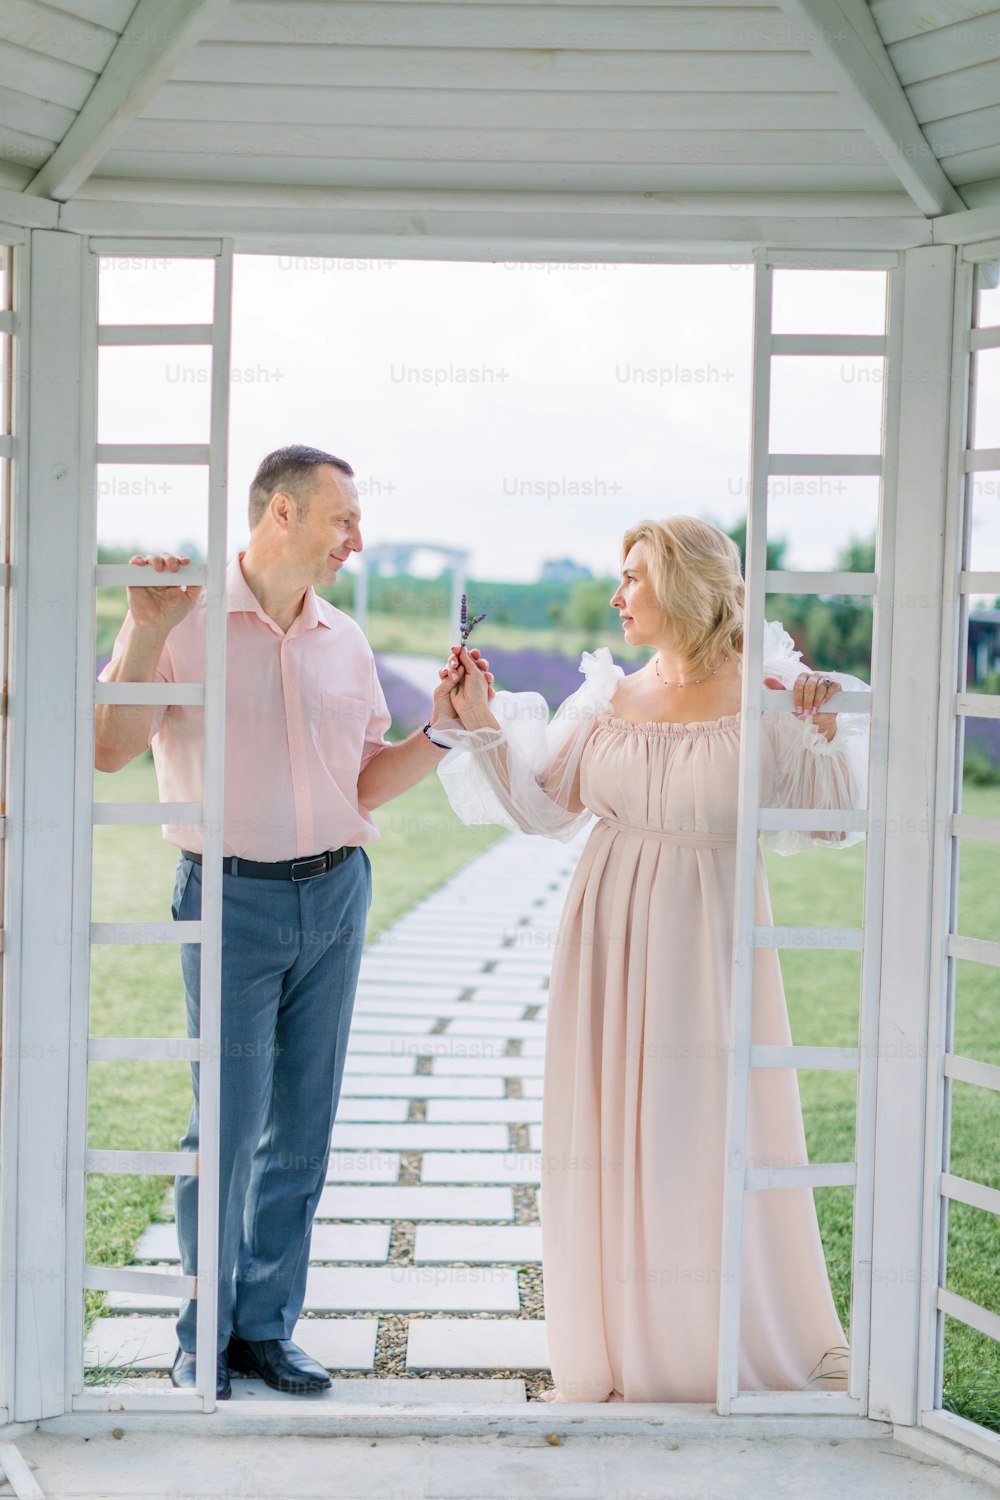 Full length portrait of mature elegant couple, standing outside of white wooden gazebo, looking each other and holding flowering lavender in hands